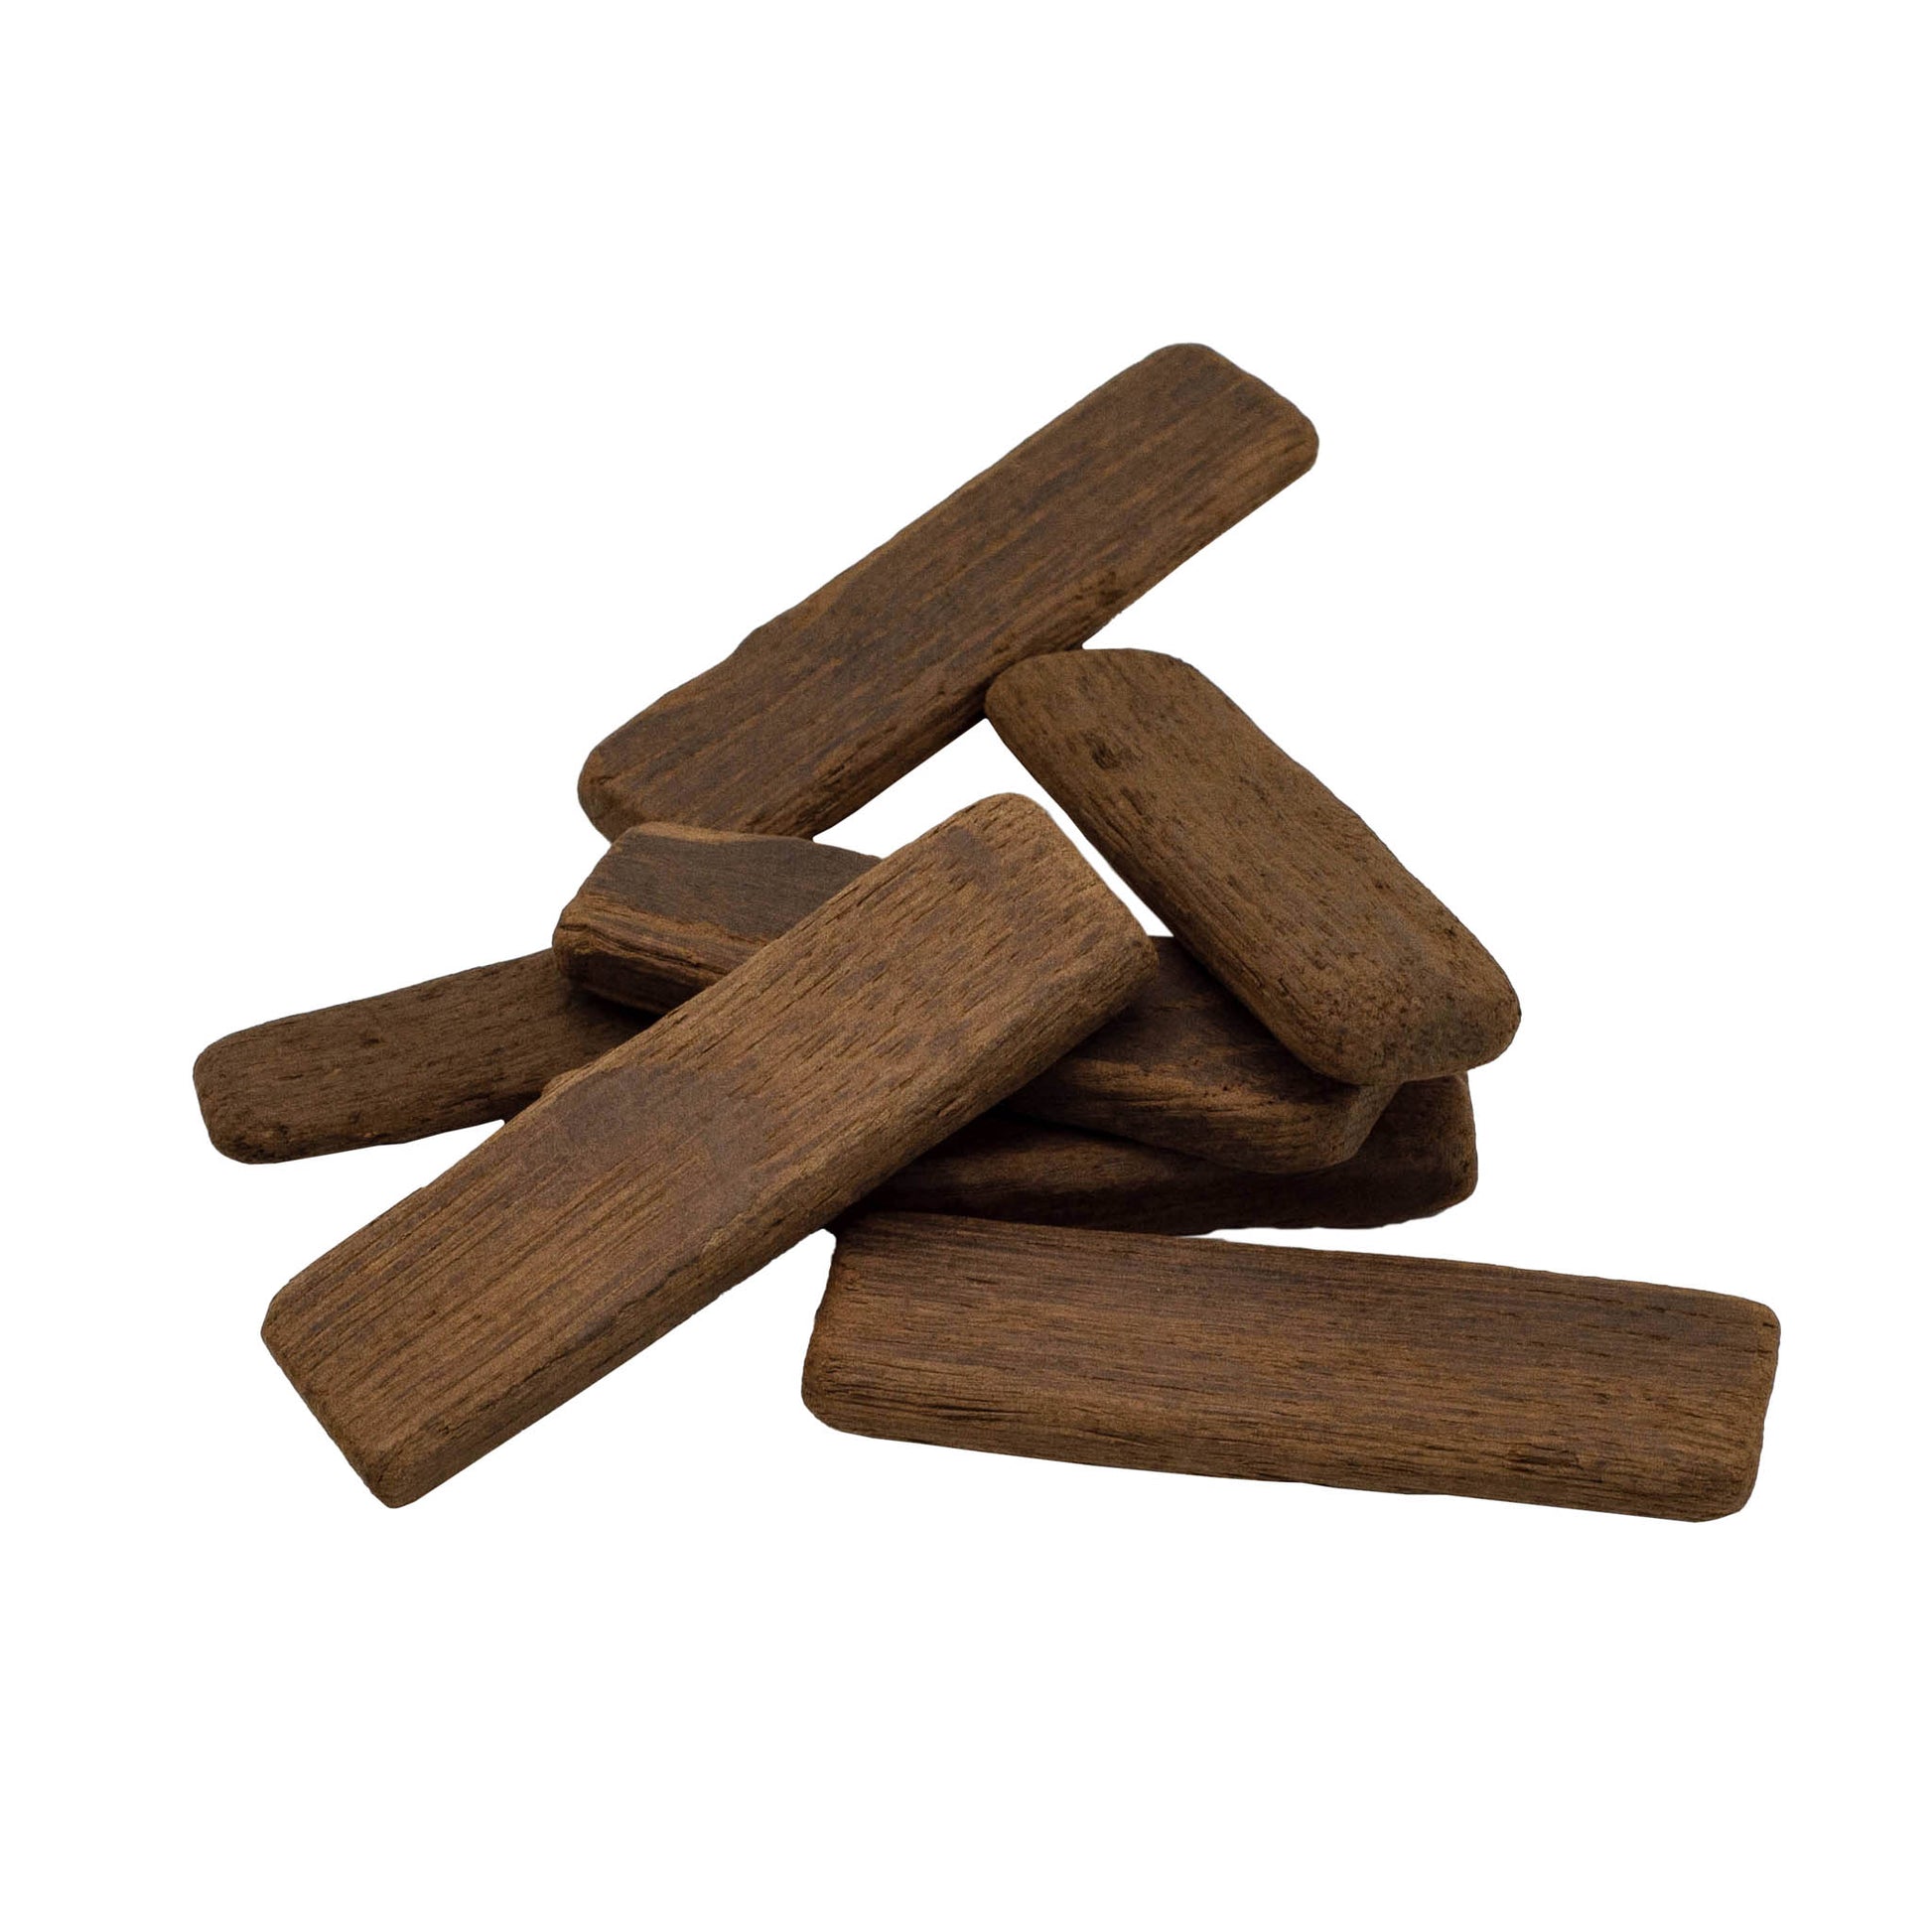 1kg bag of french oak staves to use during wine making to impart oal flavours. 